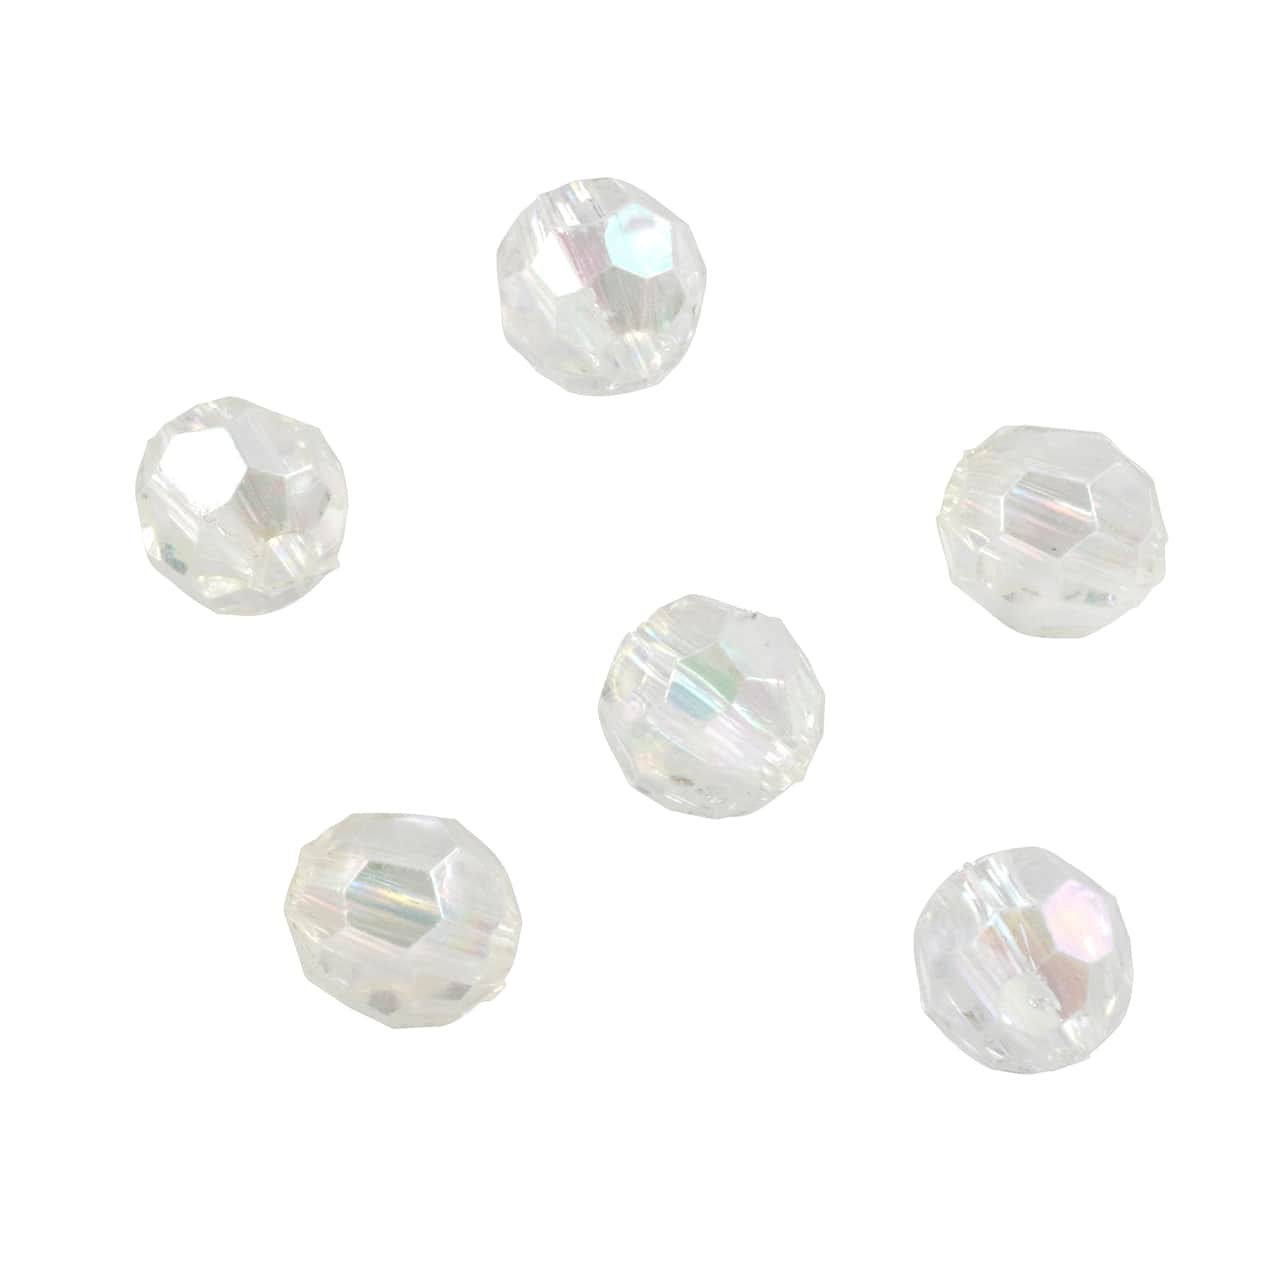 6 Pack: Clear Aurora Borealis Faceted Acrylic Round Craft Beads by